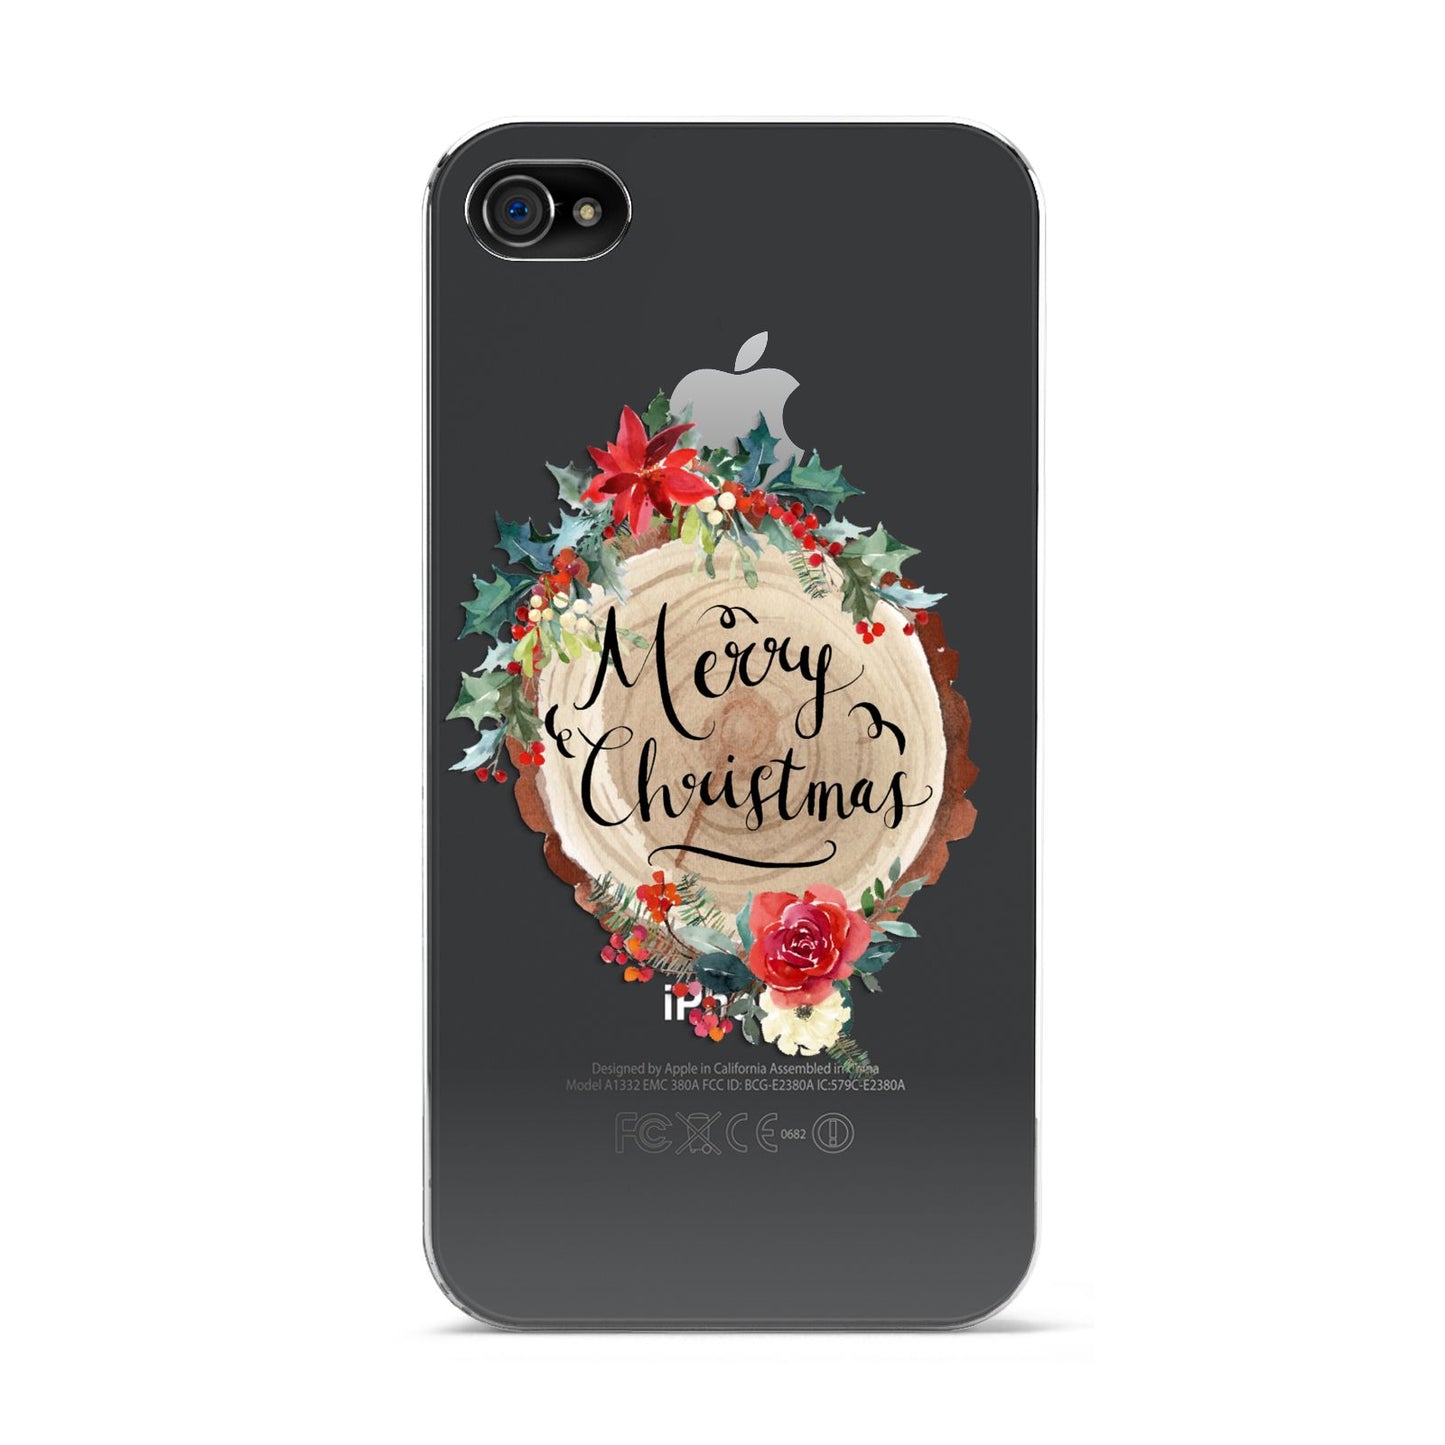 Merry Christmas Log Floral Apple iPhone 4s Case